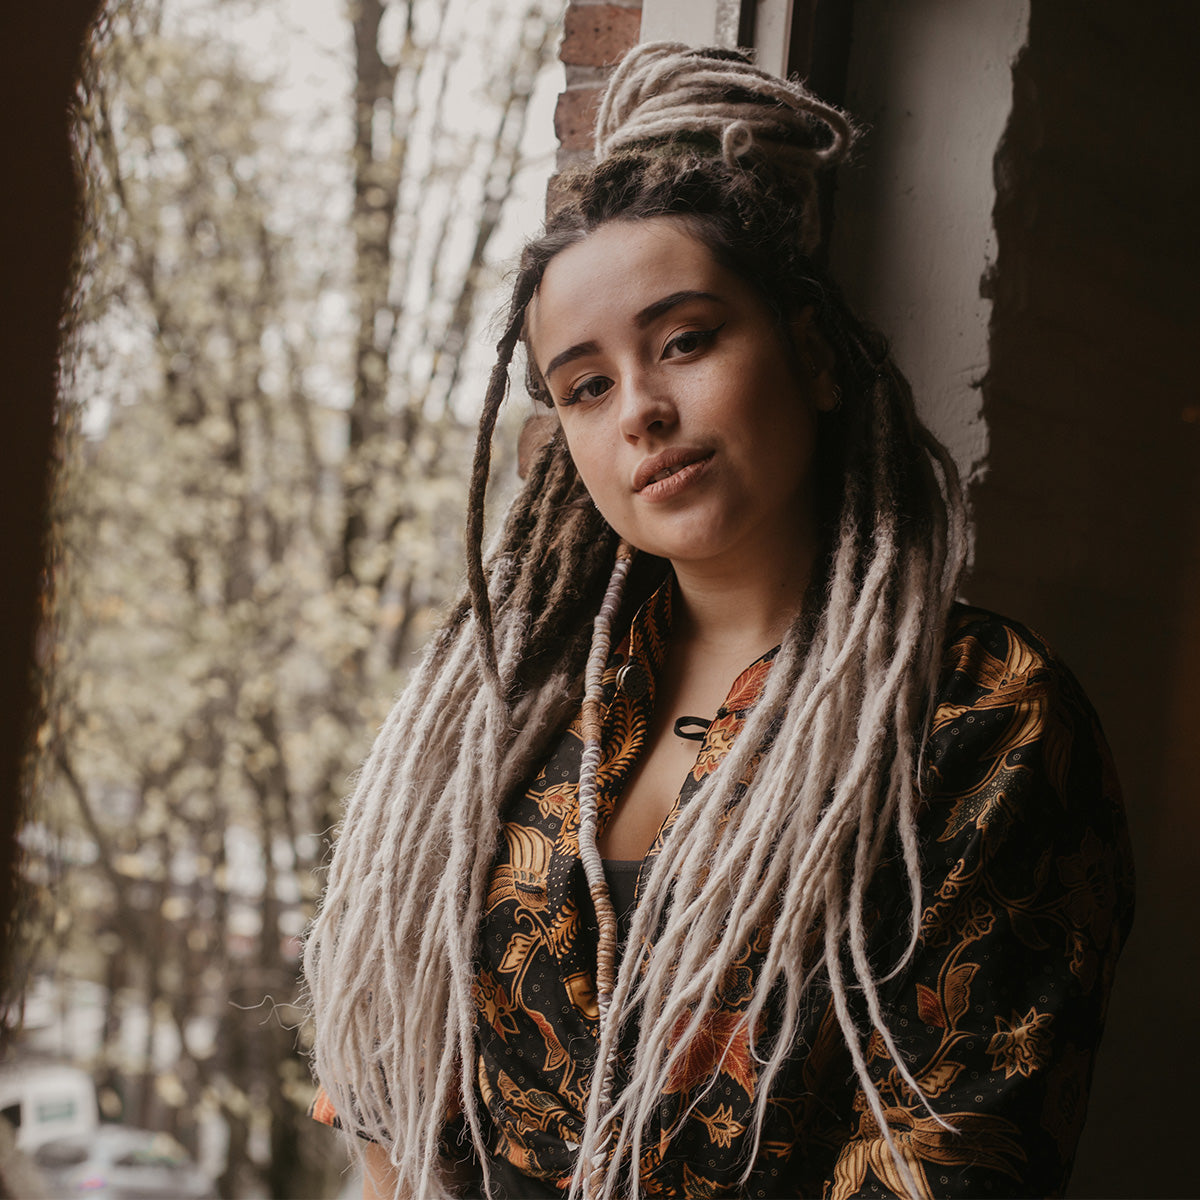 Romy in the window with chocolate swirl dreads, Are synthetic dreads harmful for your hair? 